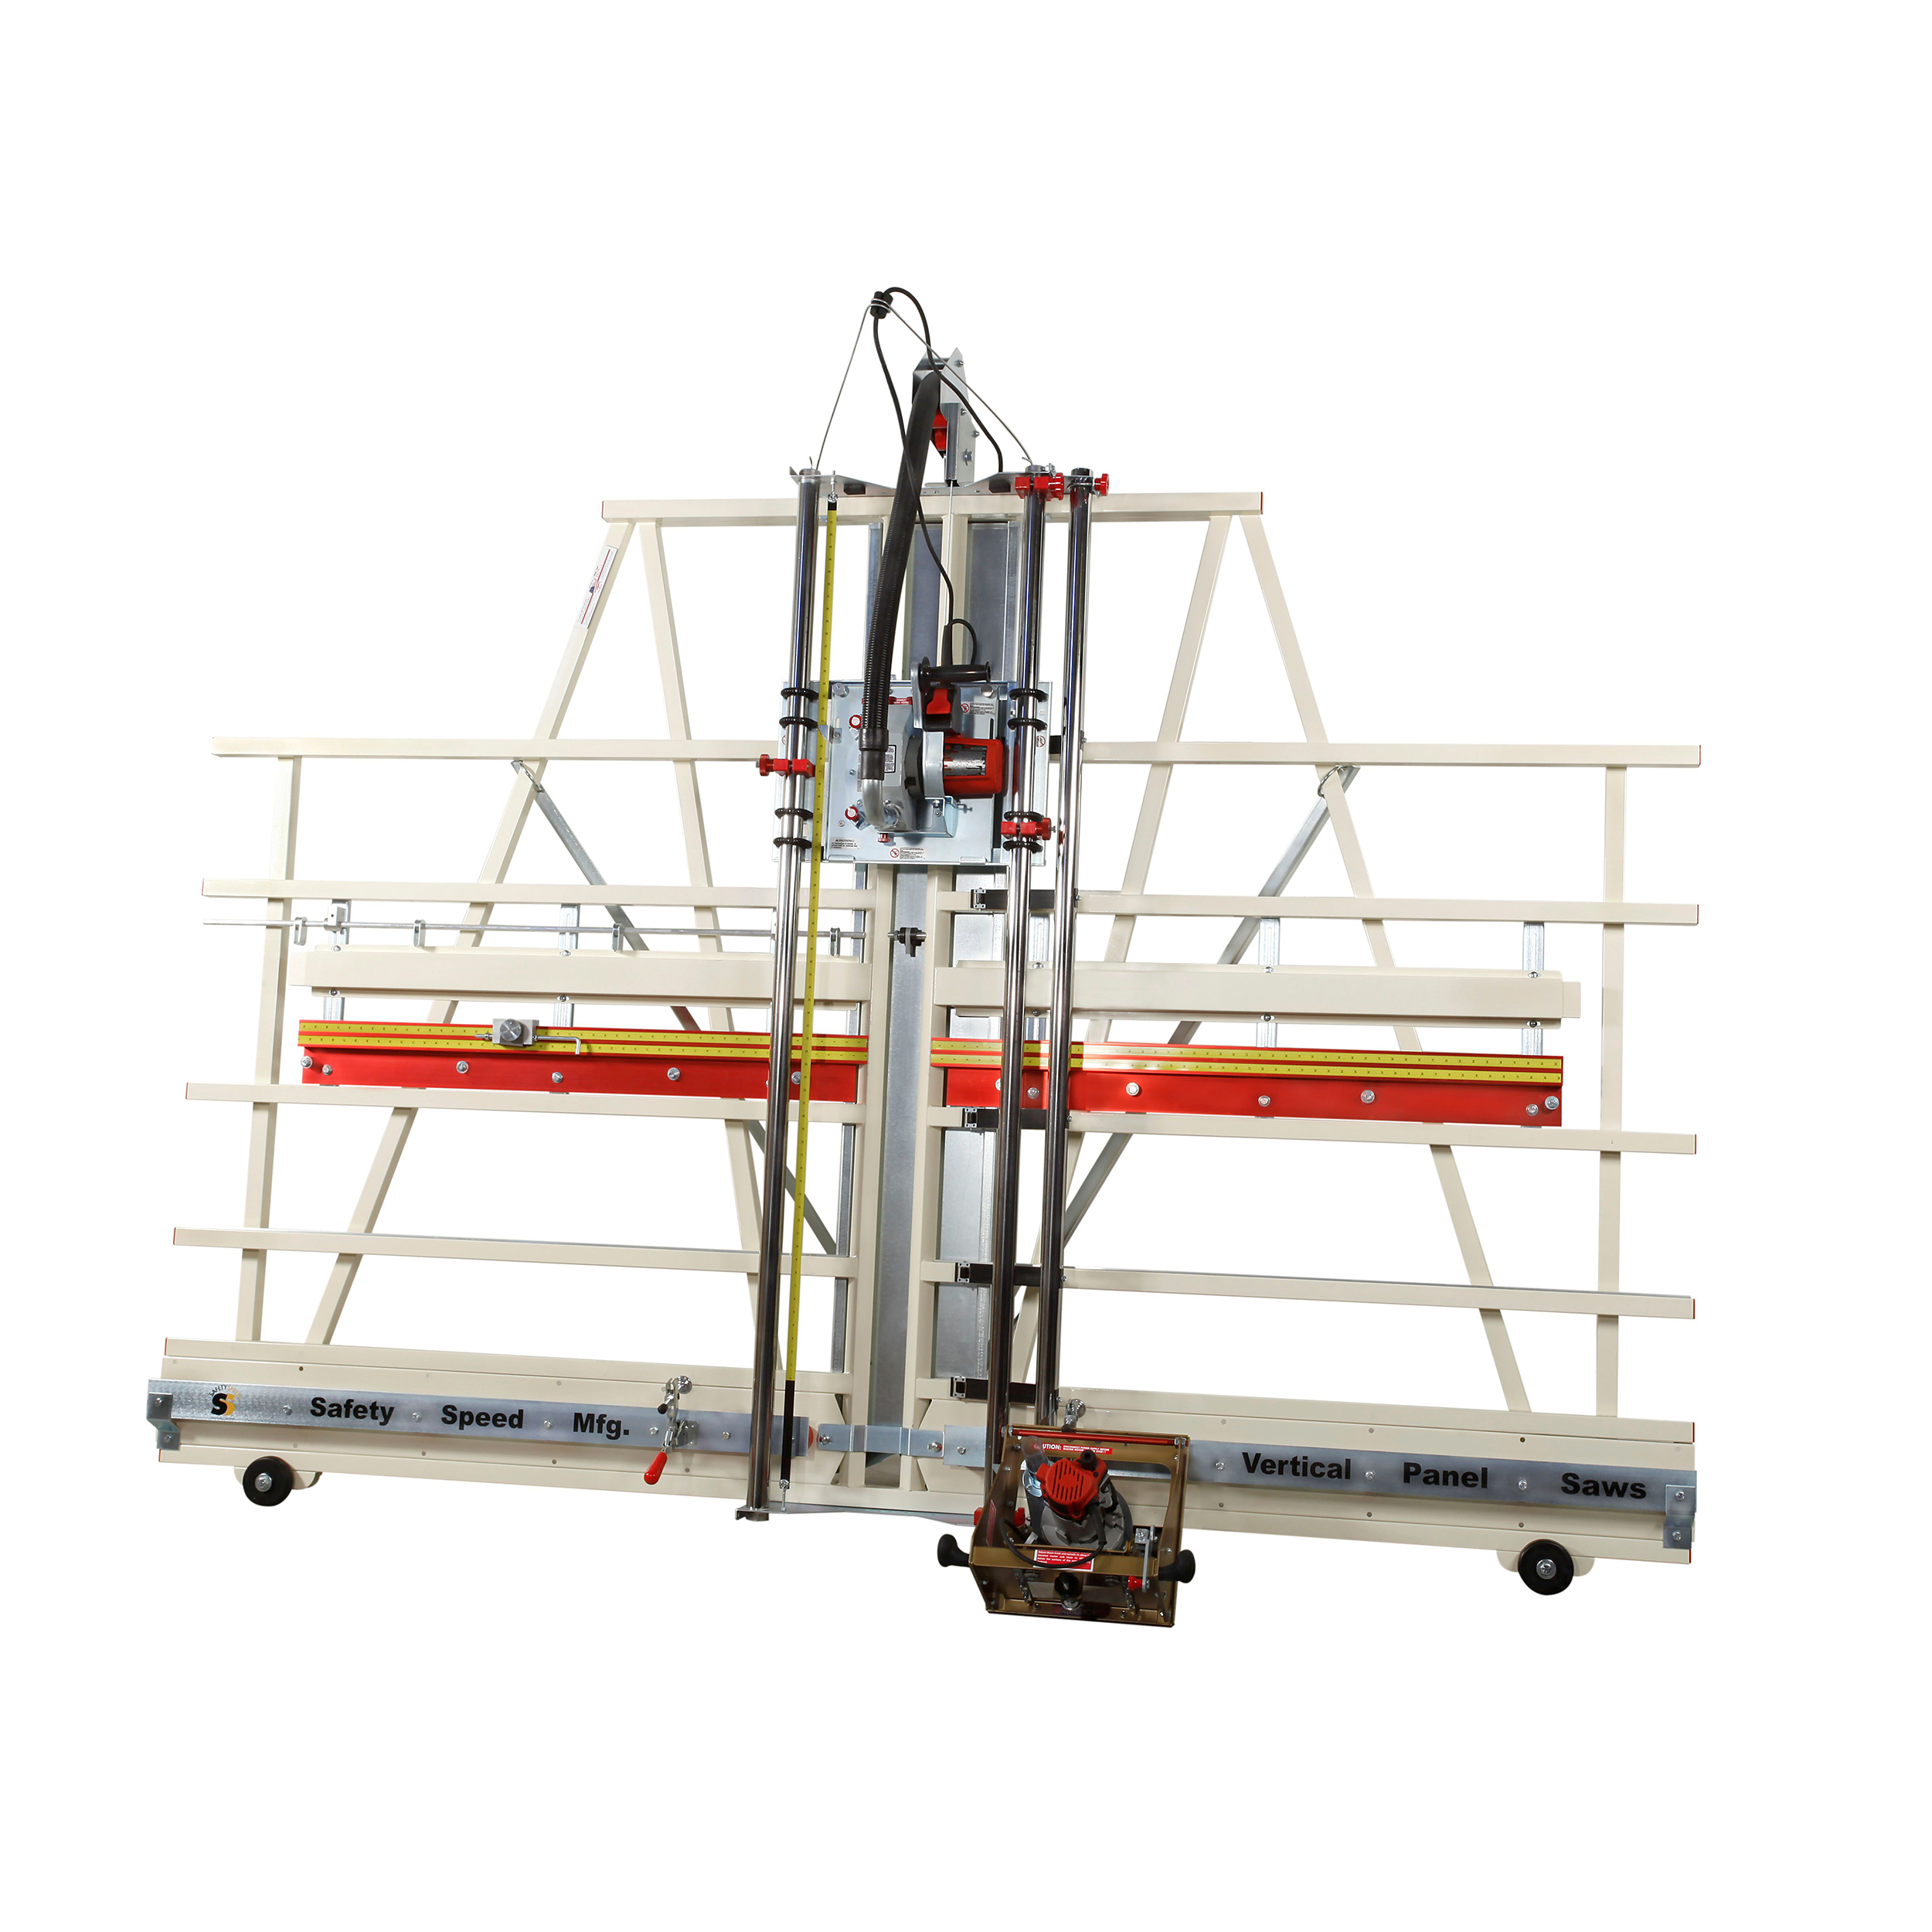 Safety Speed Sr5 Vertical Panel Saw/router